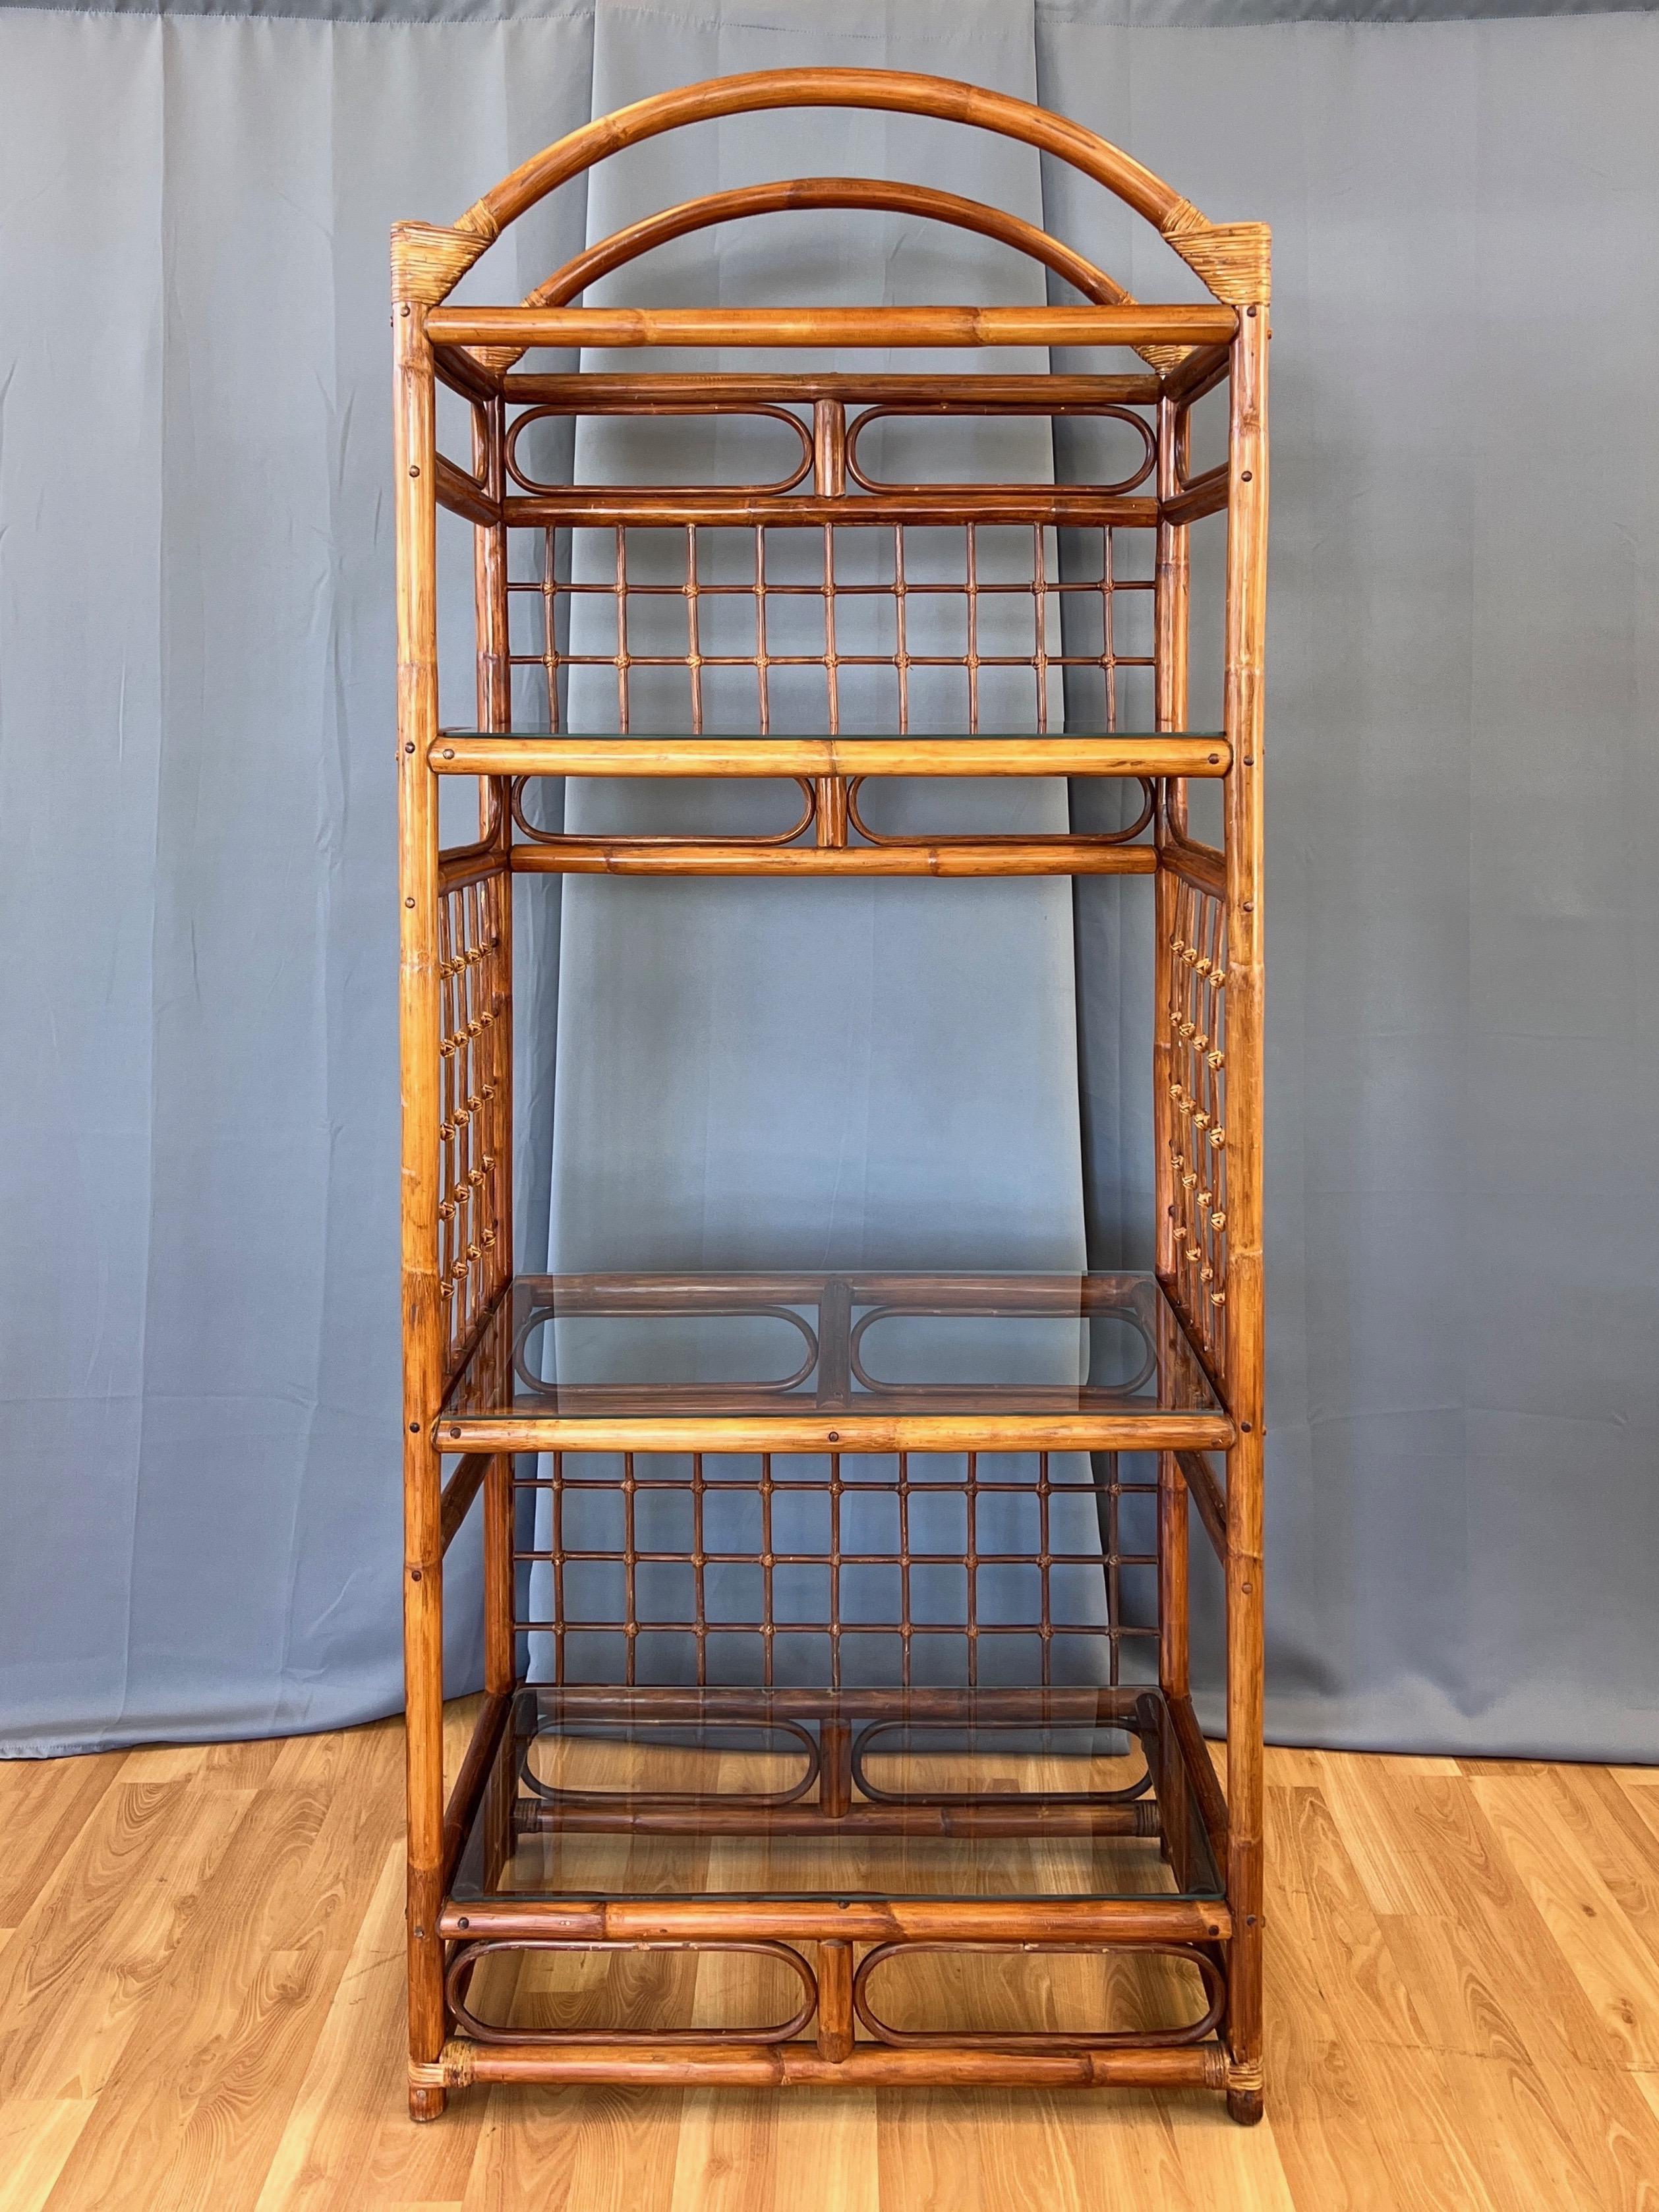 A tall and spacious 1970s bent rattan étagère or shelving unit with three glass shelves.

Arched top with various bent rattan elements and woven lattice panels at back and sides. Corners and lattice feature wrapped and woven cane details. Finished